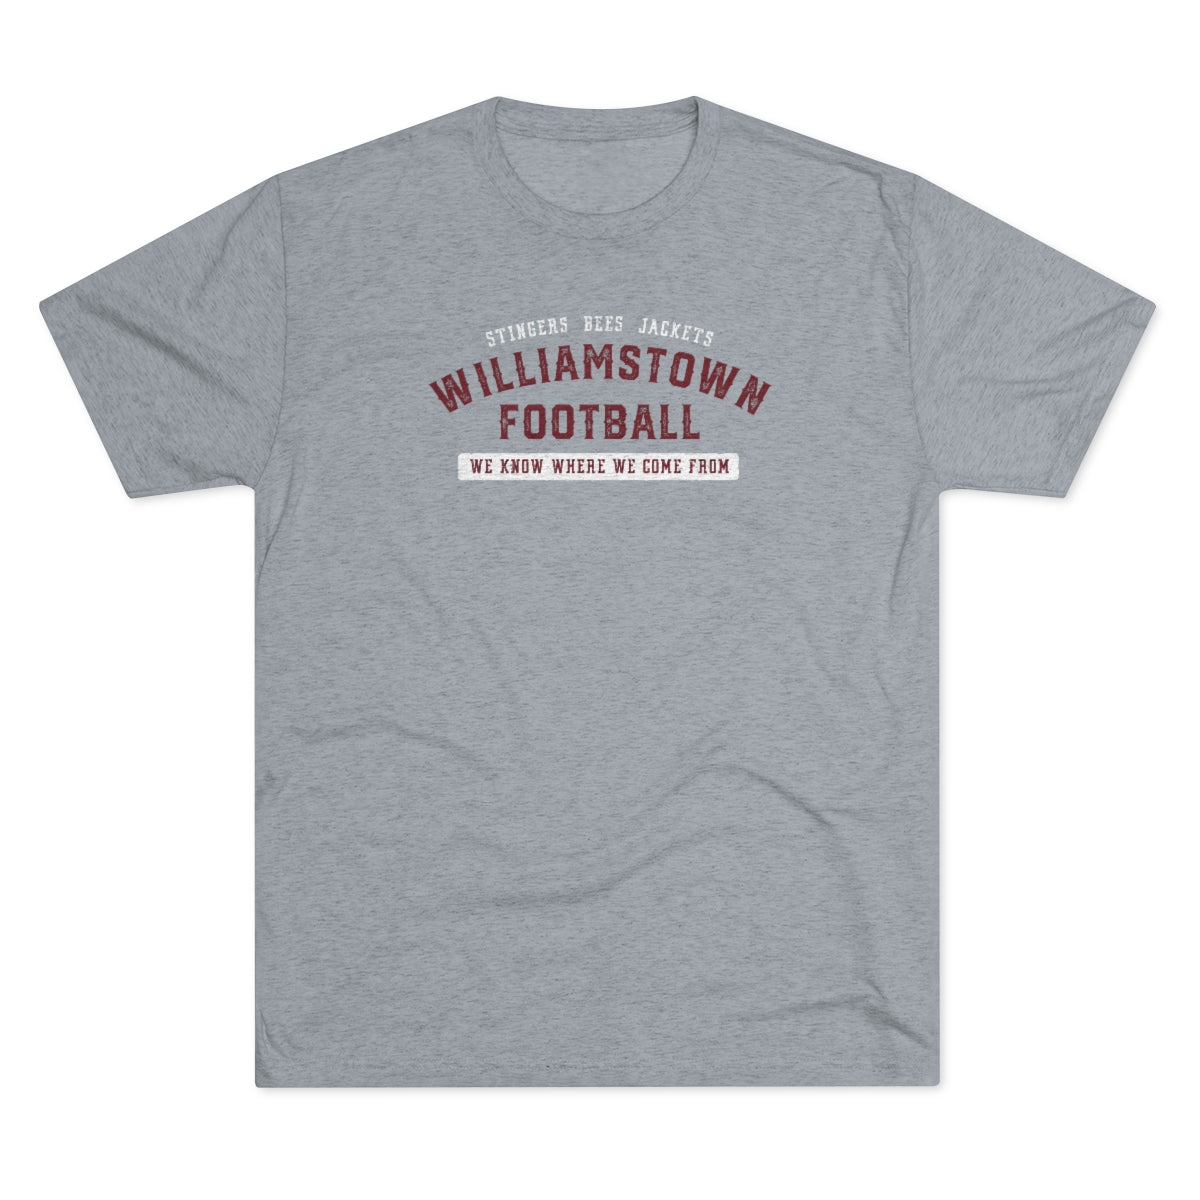 STINGERS BEES JACKETS-WE KNOW WHERE WE COME FROM-WILLIAMSTOWN FOOTBALL-Unisex Tri-Blend Crew Tee